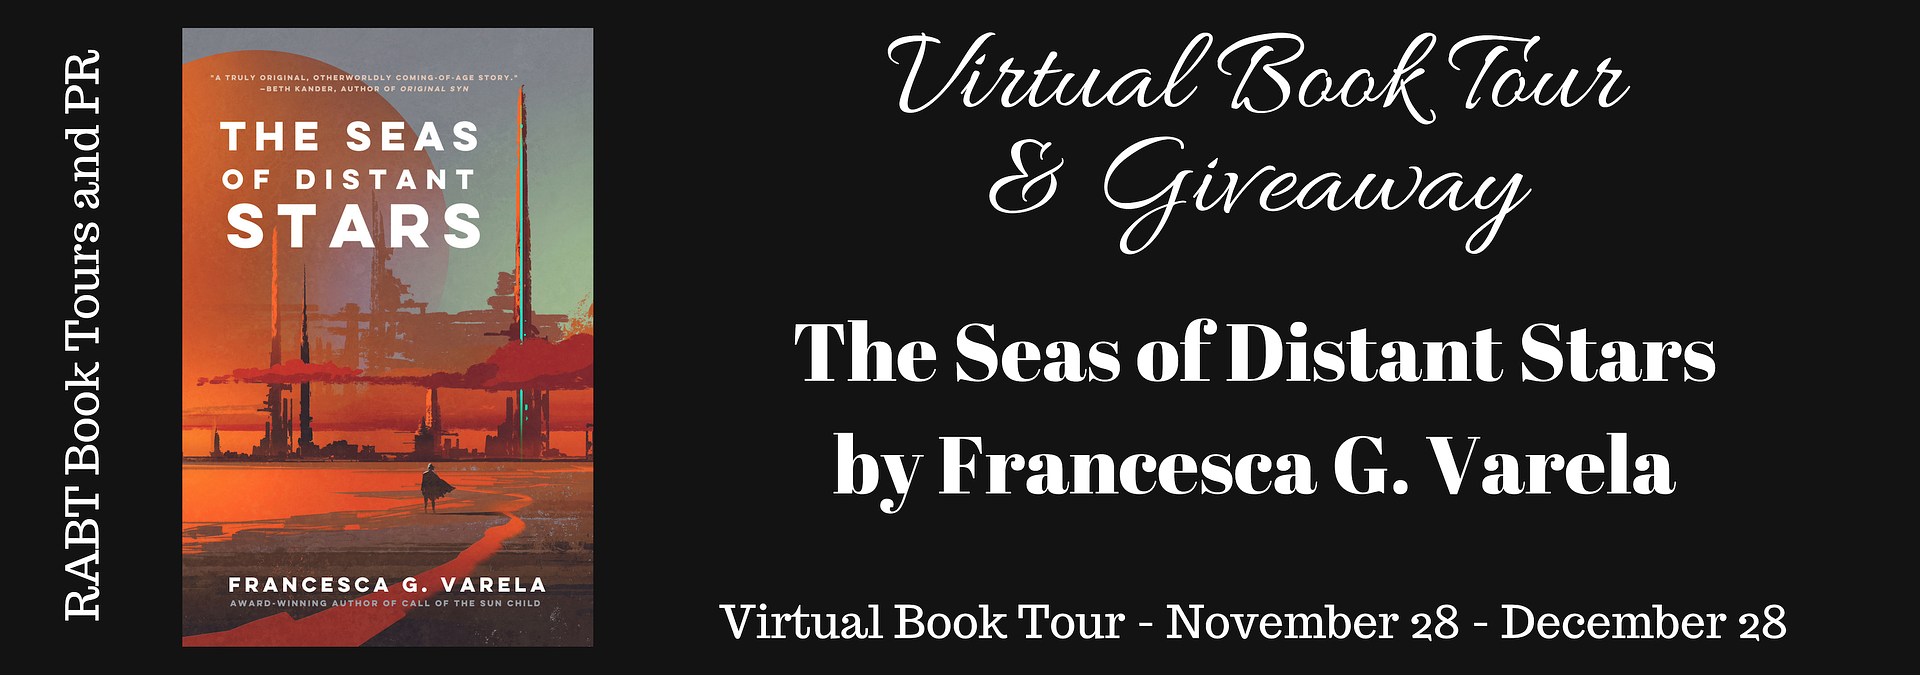 Virtual Book Tour: The Seas of Distant Stars by Francesca G. Varela @WriterFGV #interview #giveaway #sciencefiction @RABTBookTours